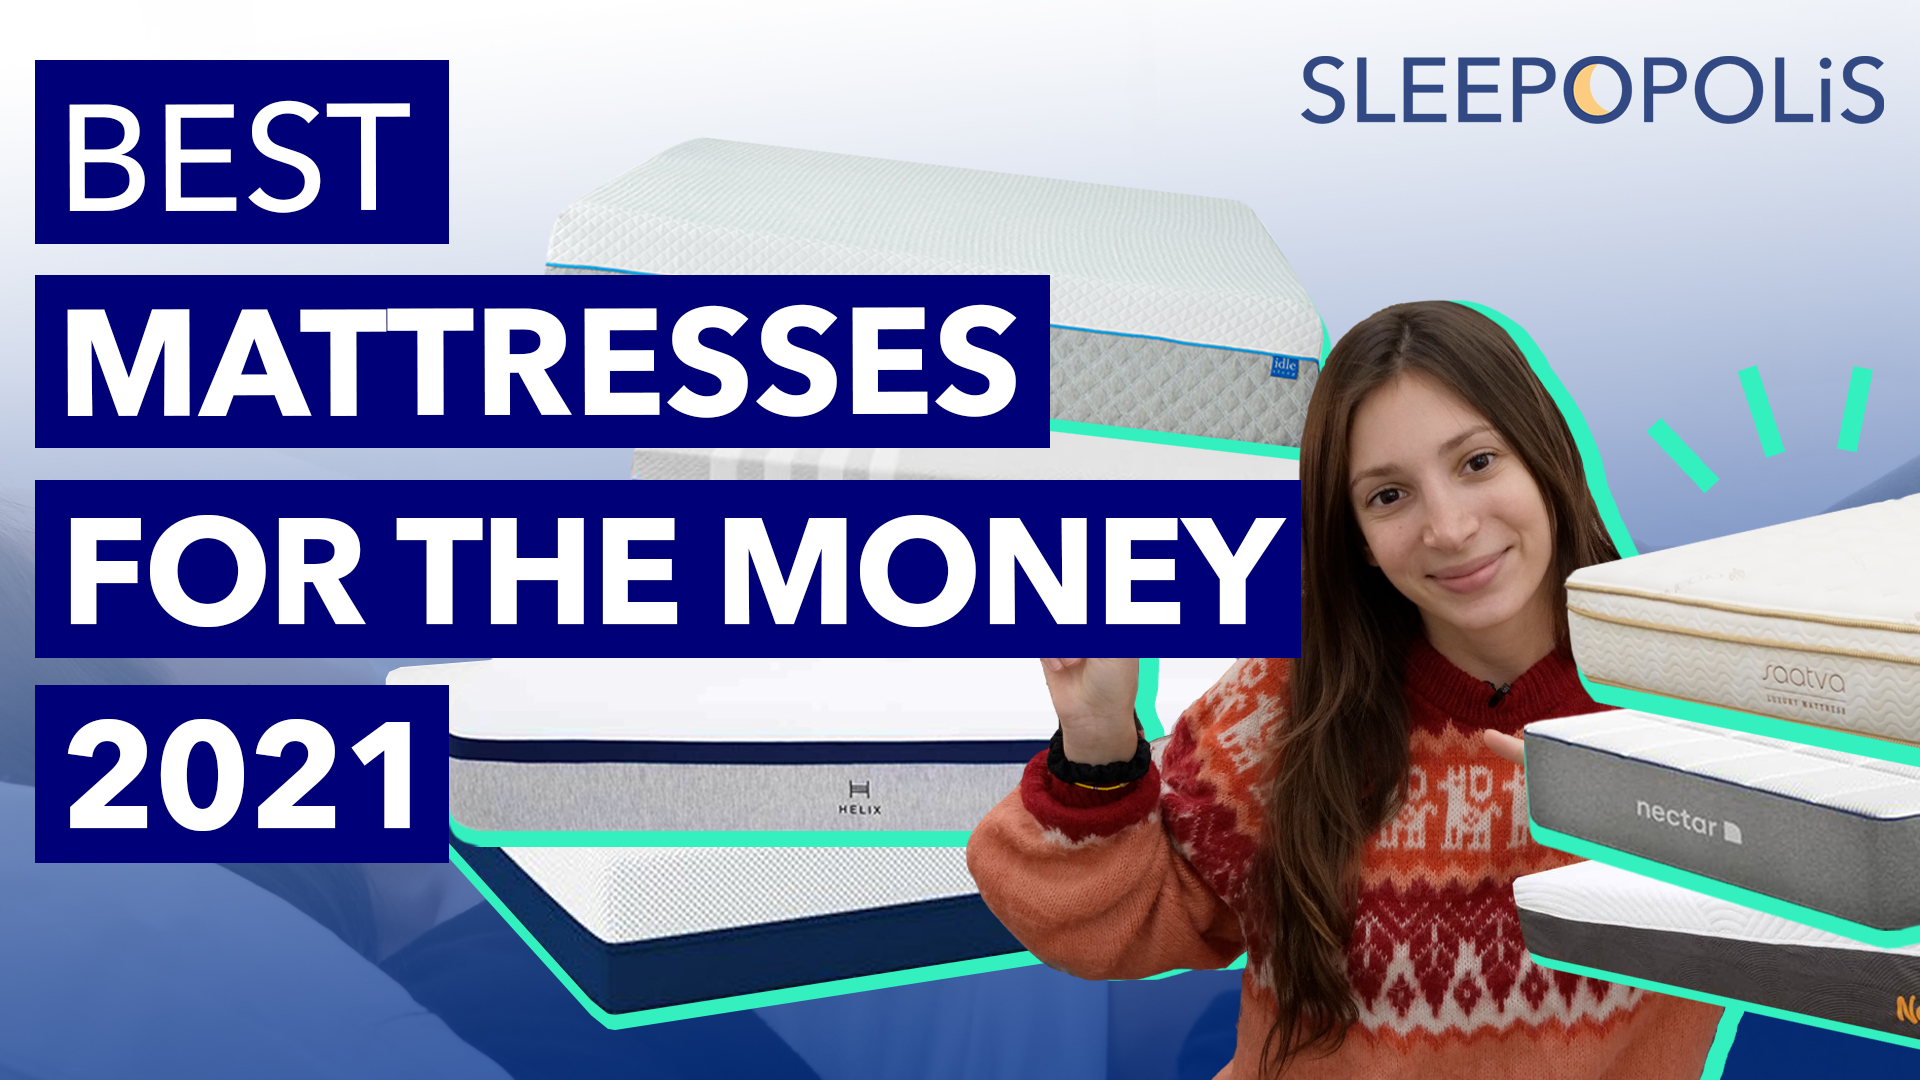 Best Mattresses For The Money (2021)   Great Mattresses For Less?